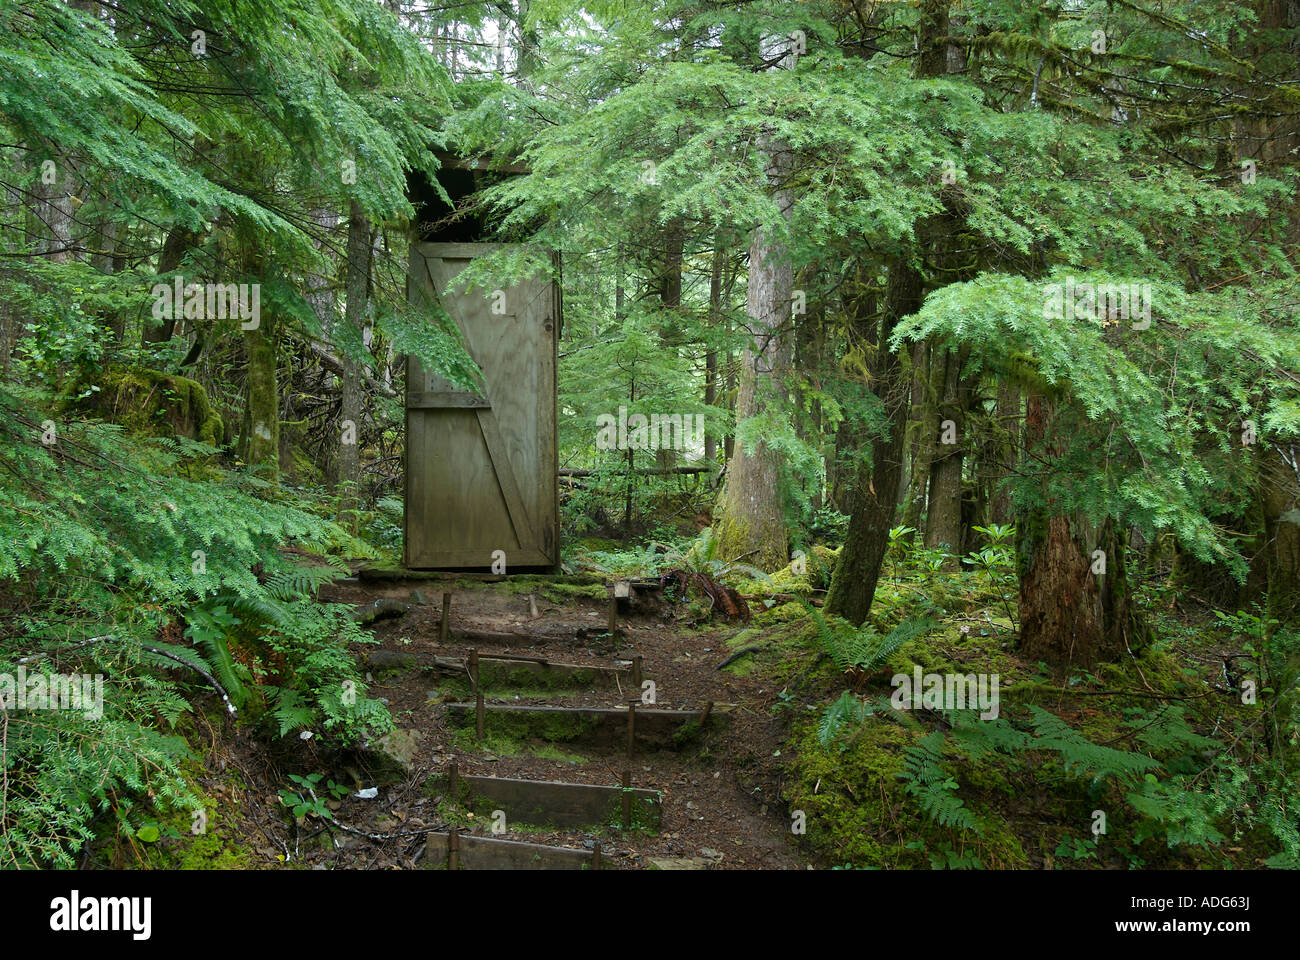 Isolated outhouse in Oregon forest Stock Photo